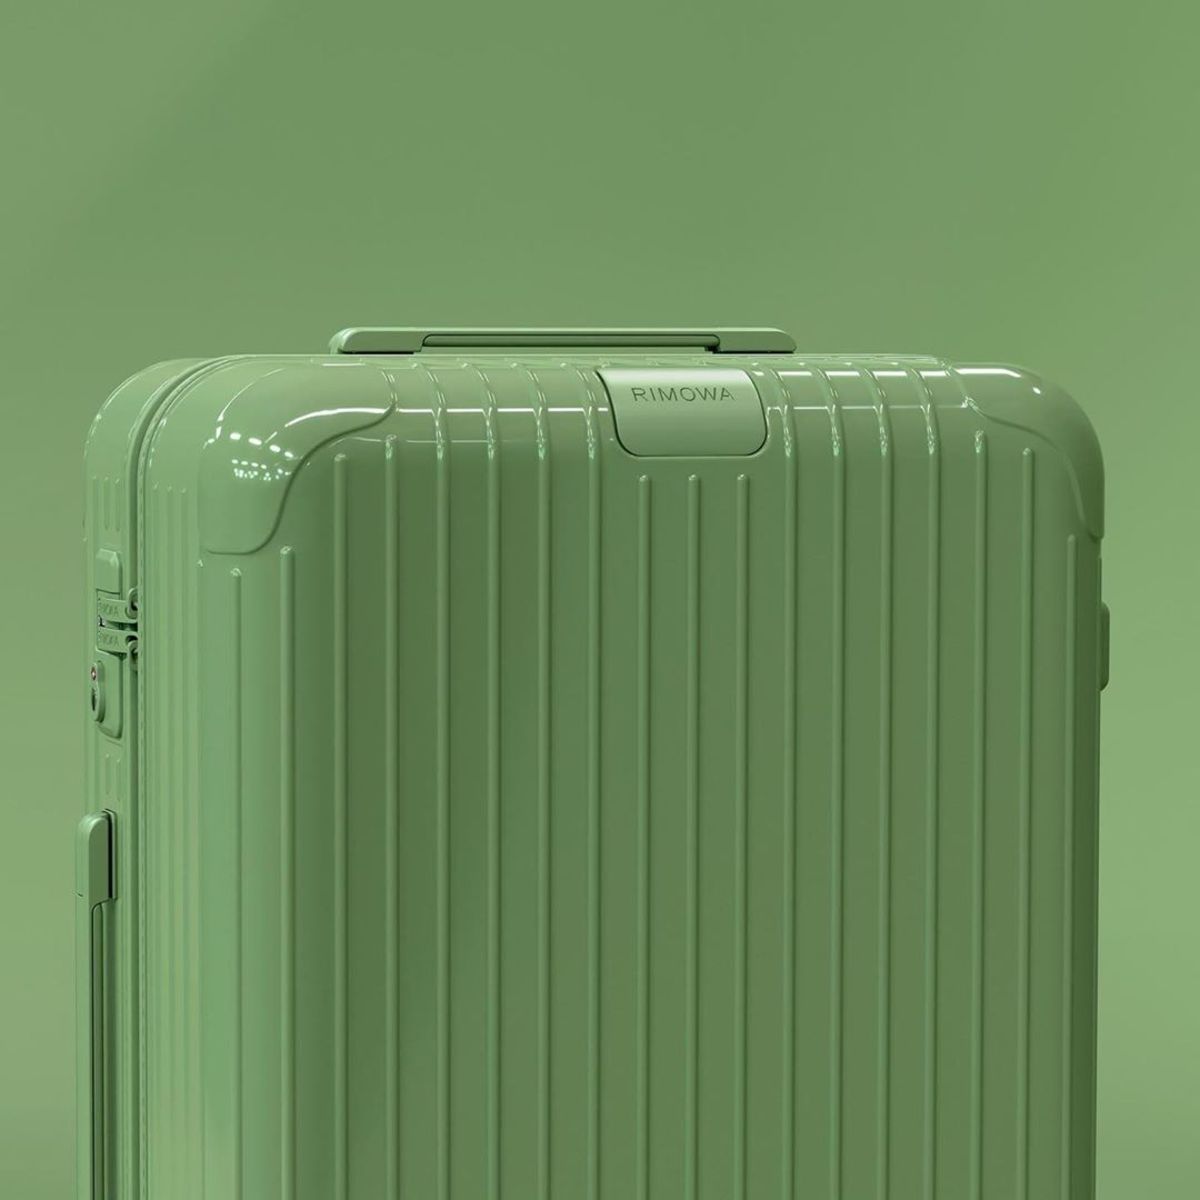 Rimowa launches a seasonal collection 